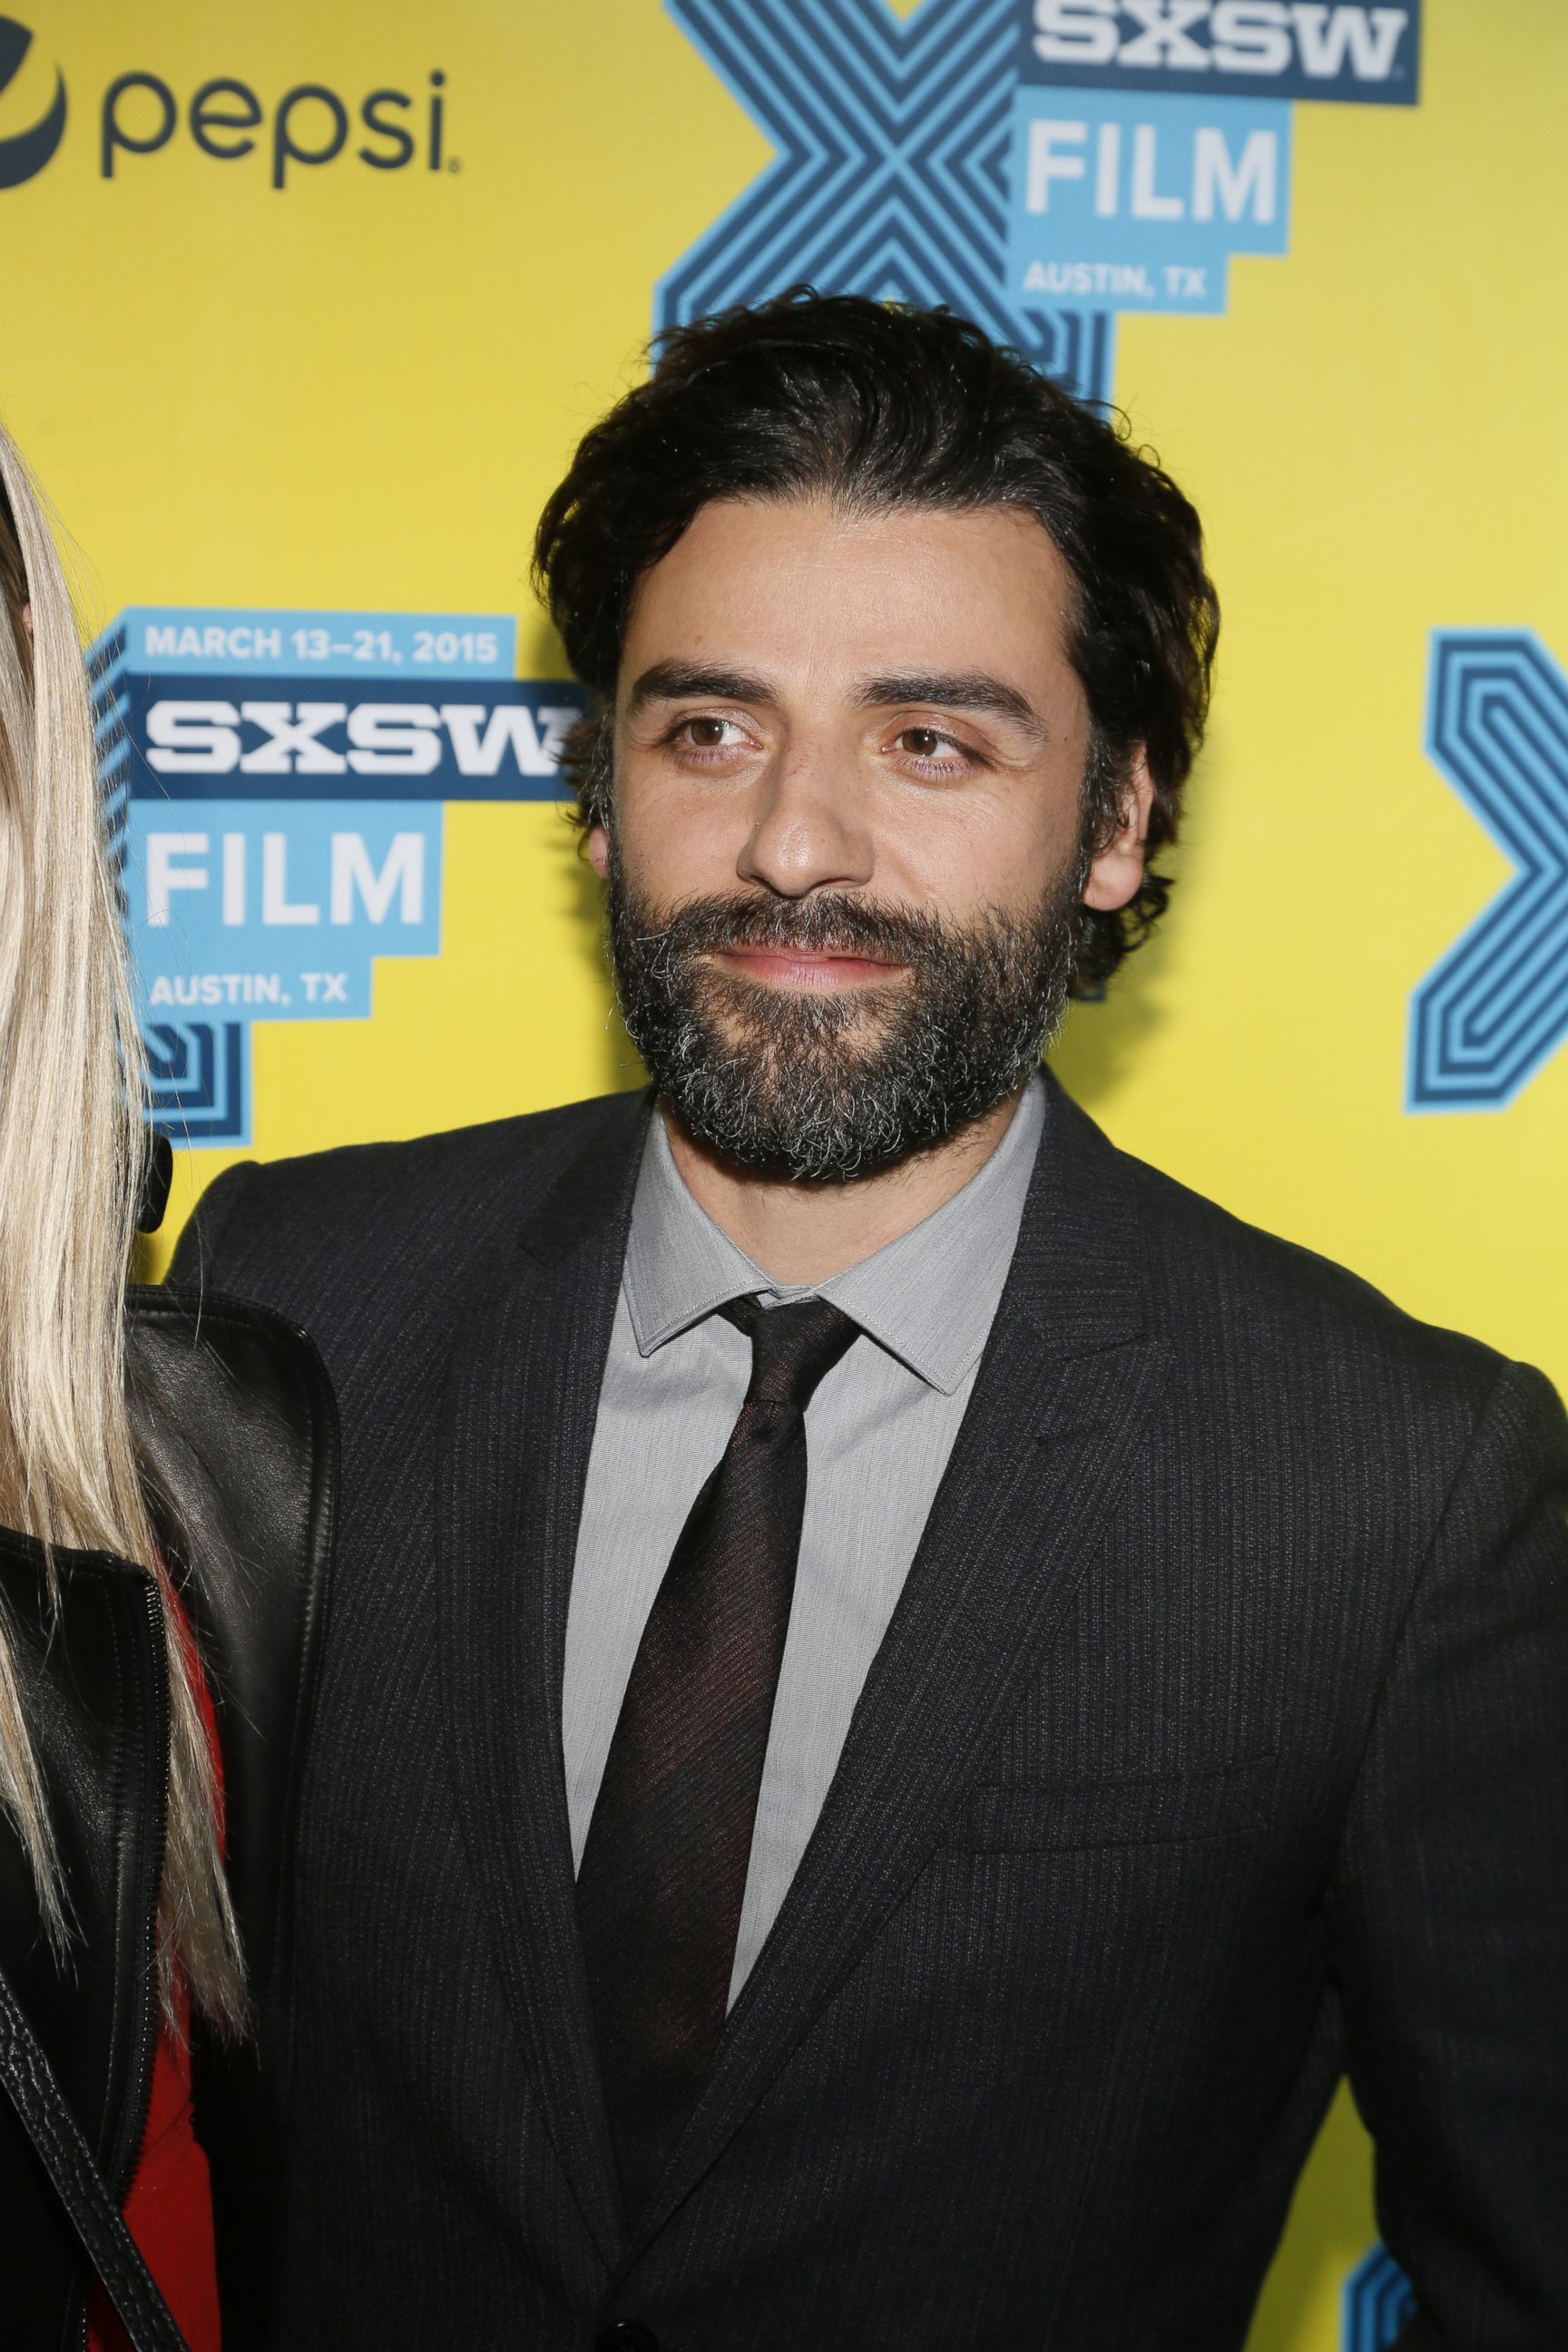 PHOTO: Oscar Isaac walks the red carpet for "Ex Machina" during the South by Southwest Film Festival on March 14, 2015 in Austin, Texas.